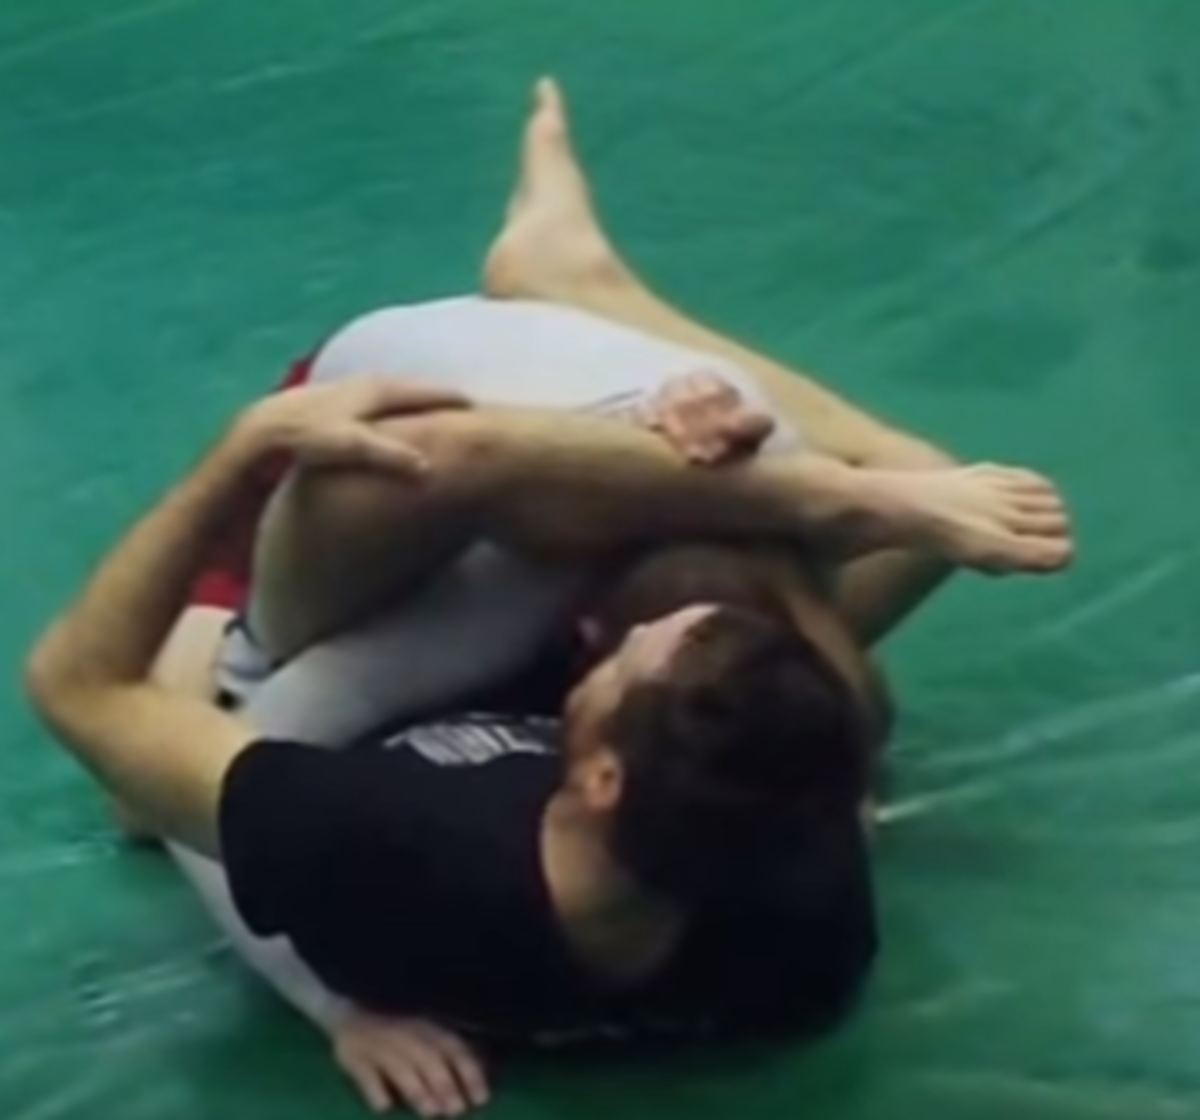 shawn-williams-guard-old-school-rubber-guard-submissions